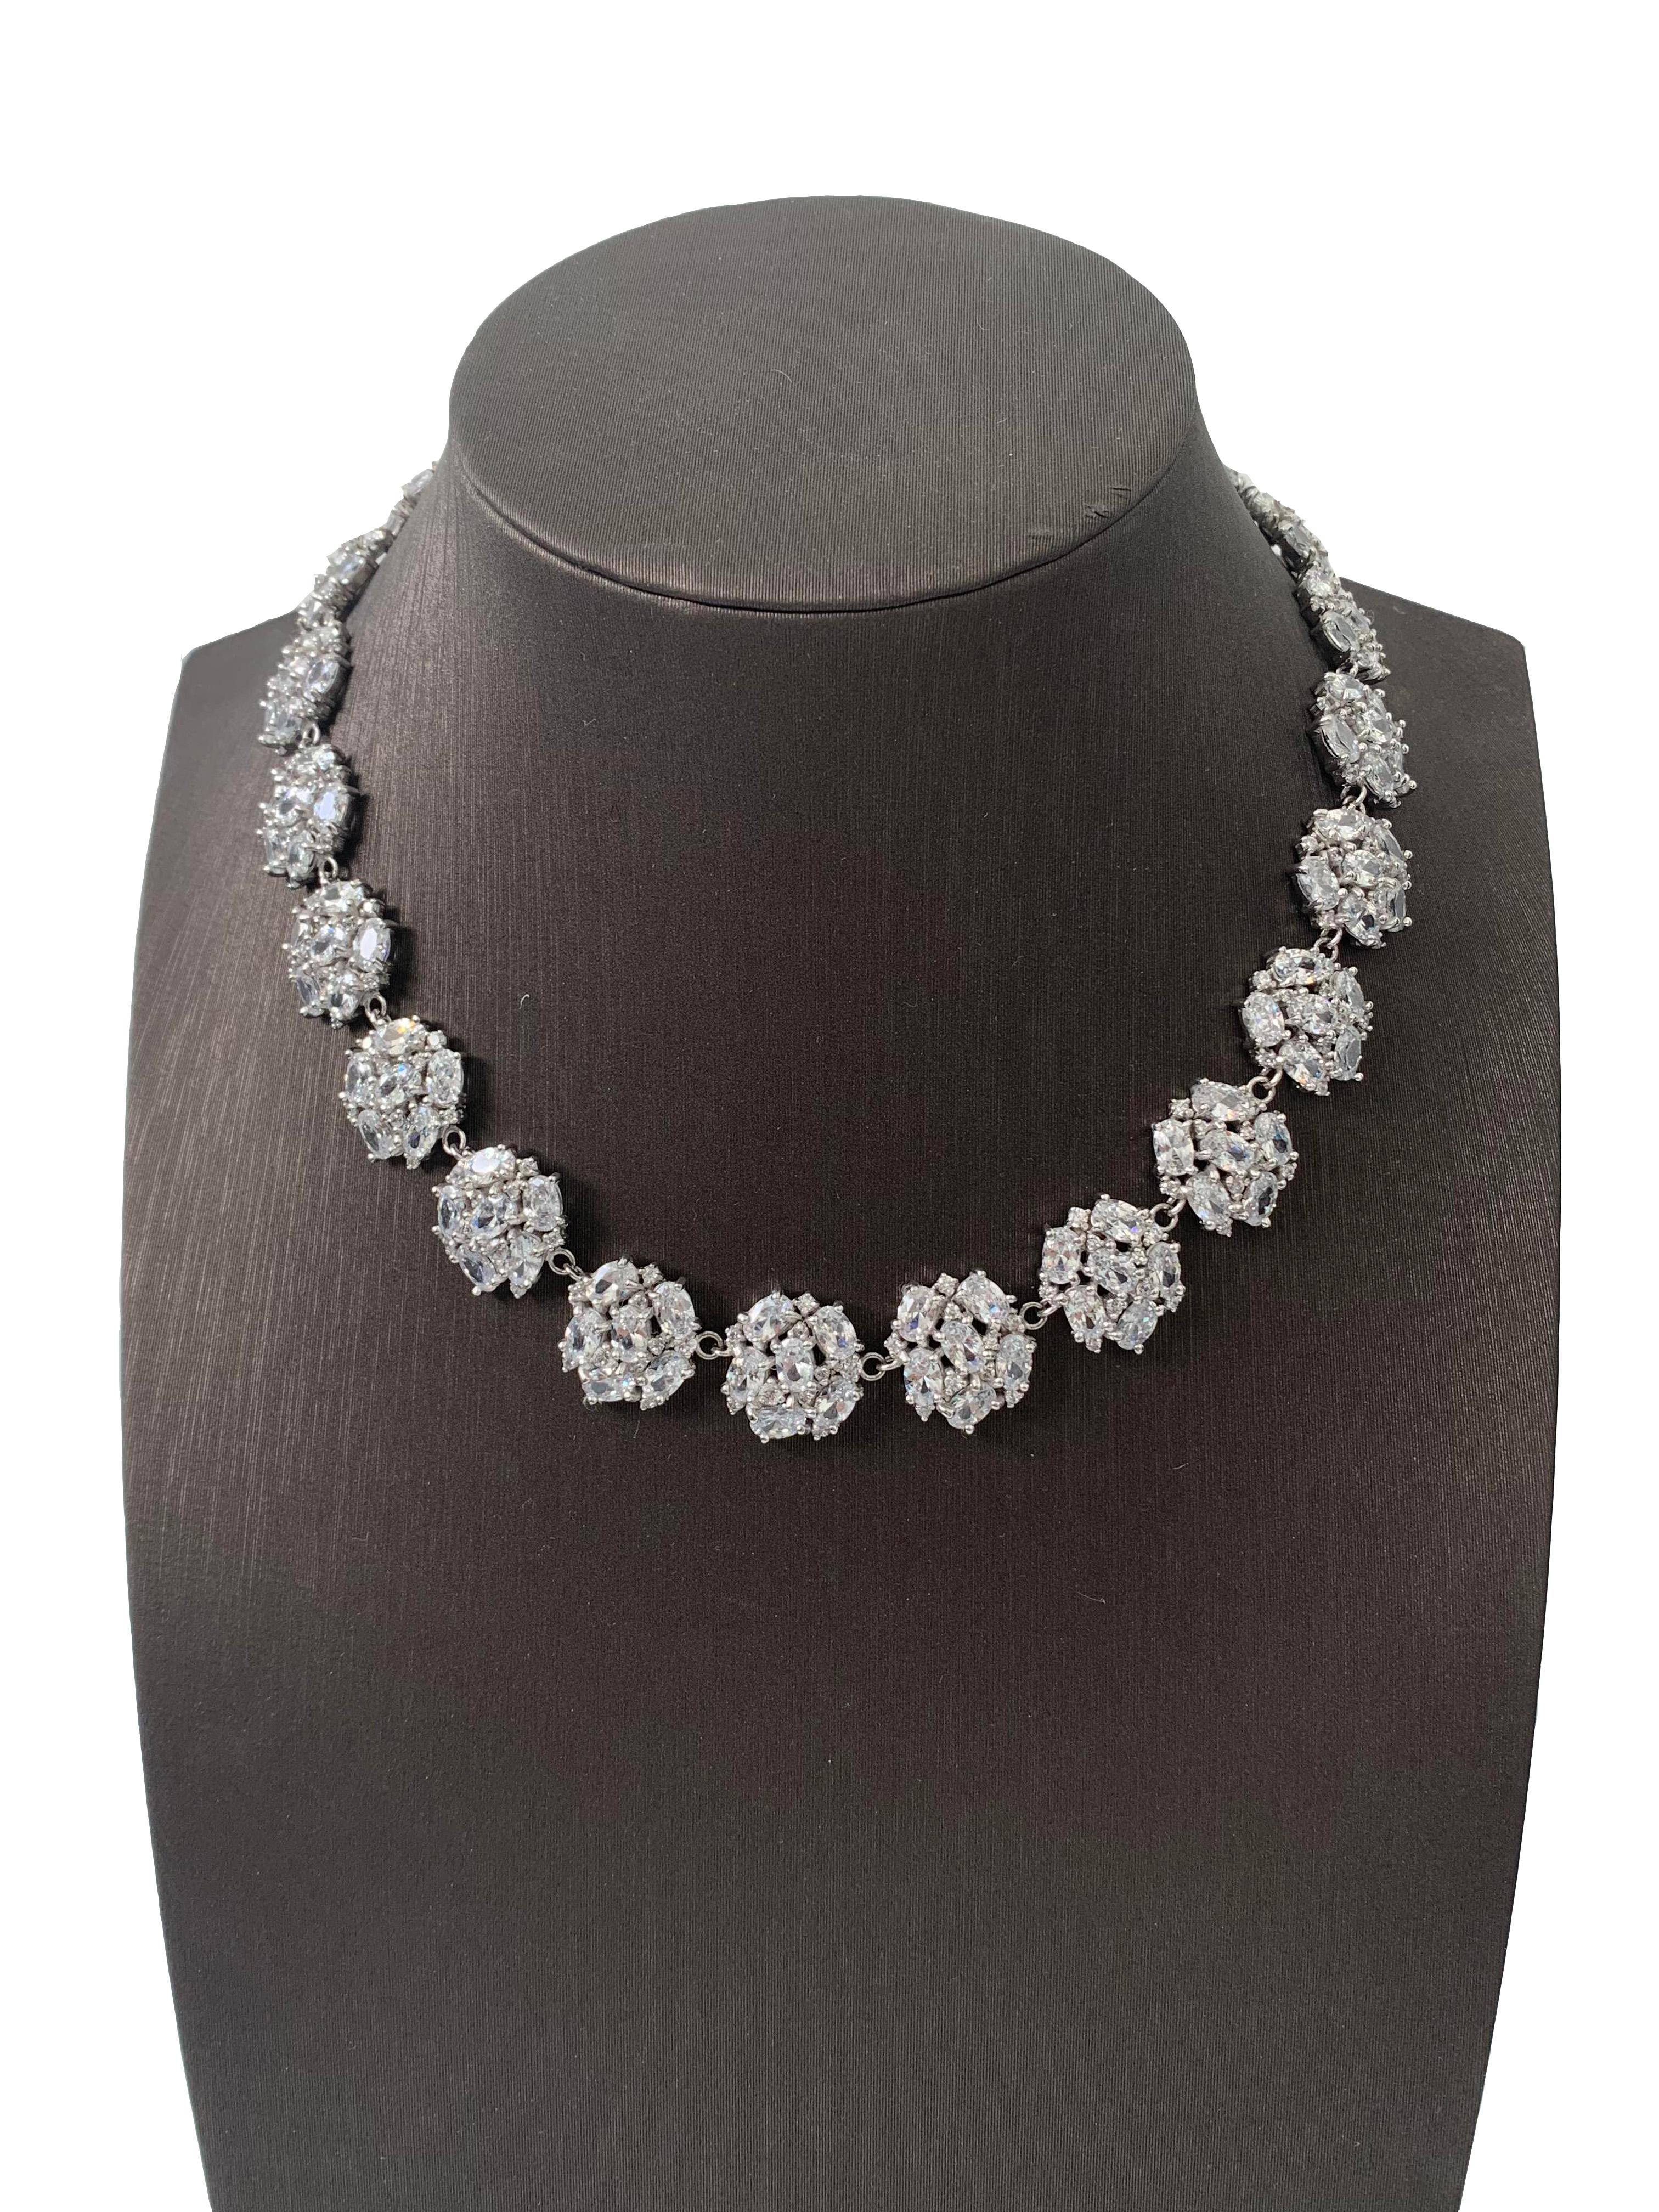 Elegant Clustered Faux Diamond CZ Sterling Silver Link Necklace. 300 pieces of Oval and Round Cubic Zirconia individually handset in platinum rhodium plated sterling silver. The necklace is approx 0.5